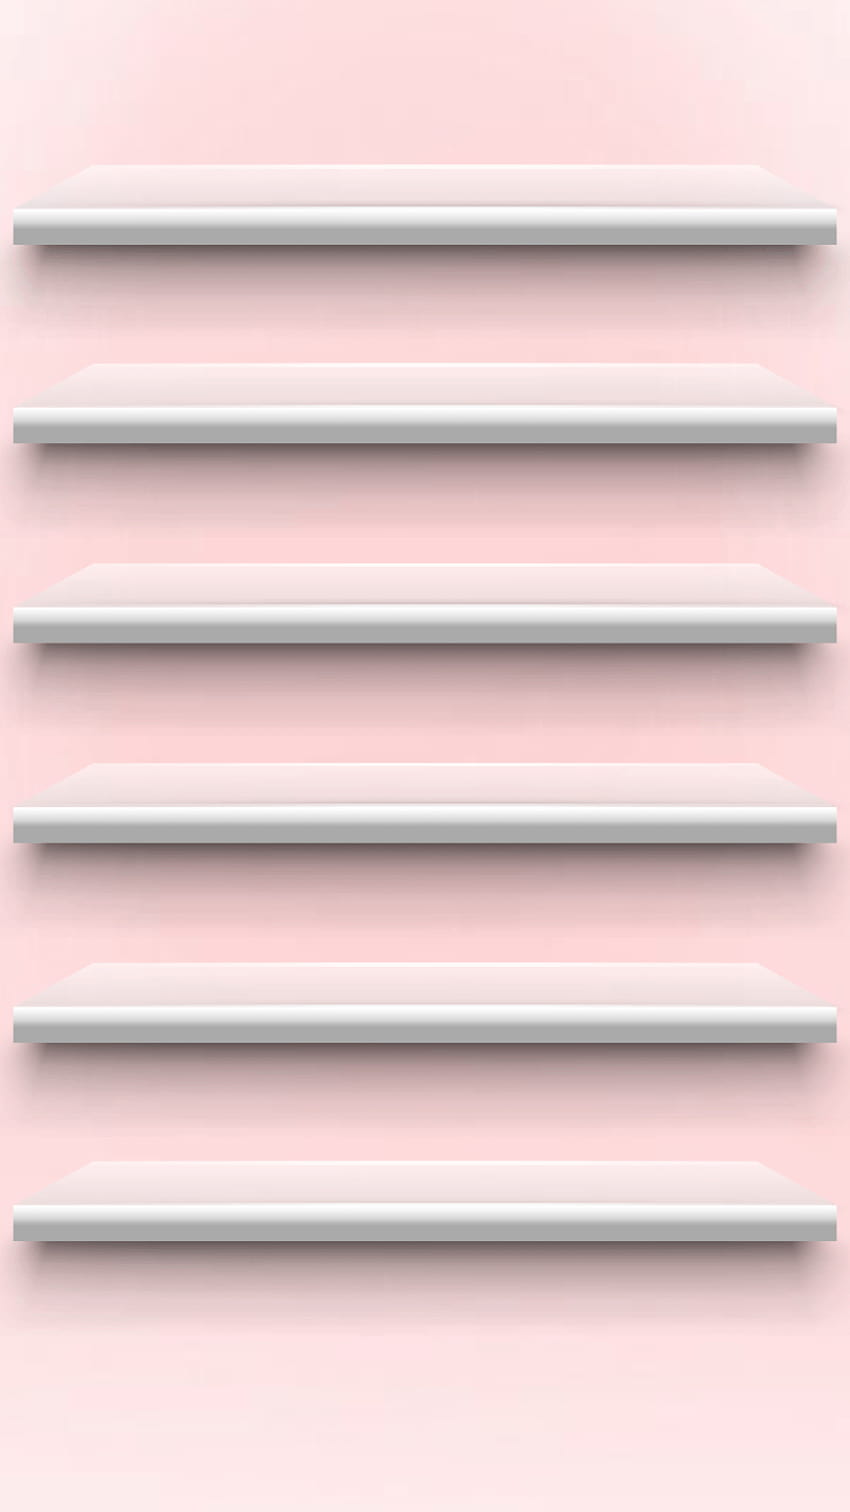 Pale pink / shelves back ground / for iPhone, shelf HD phone wallpaper